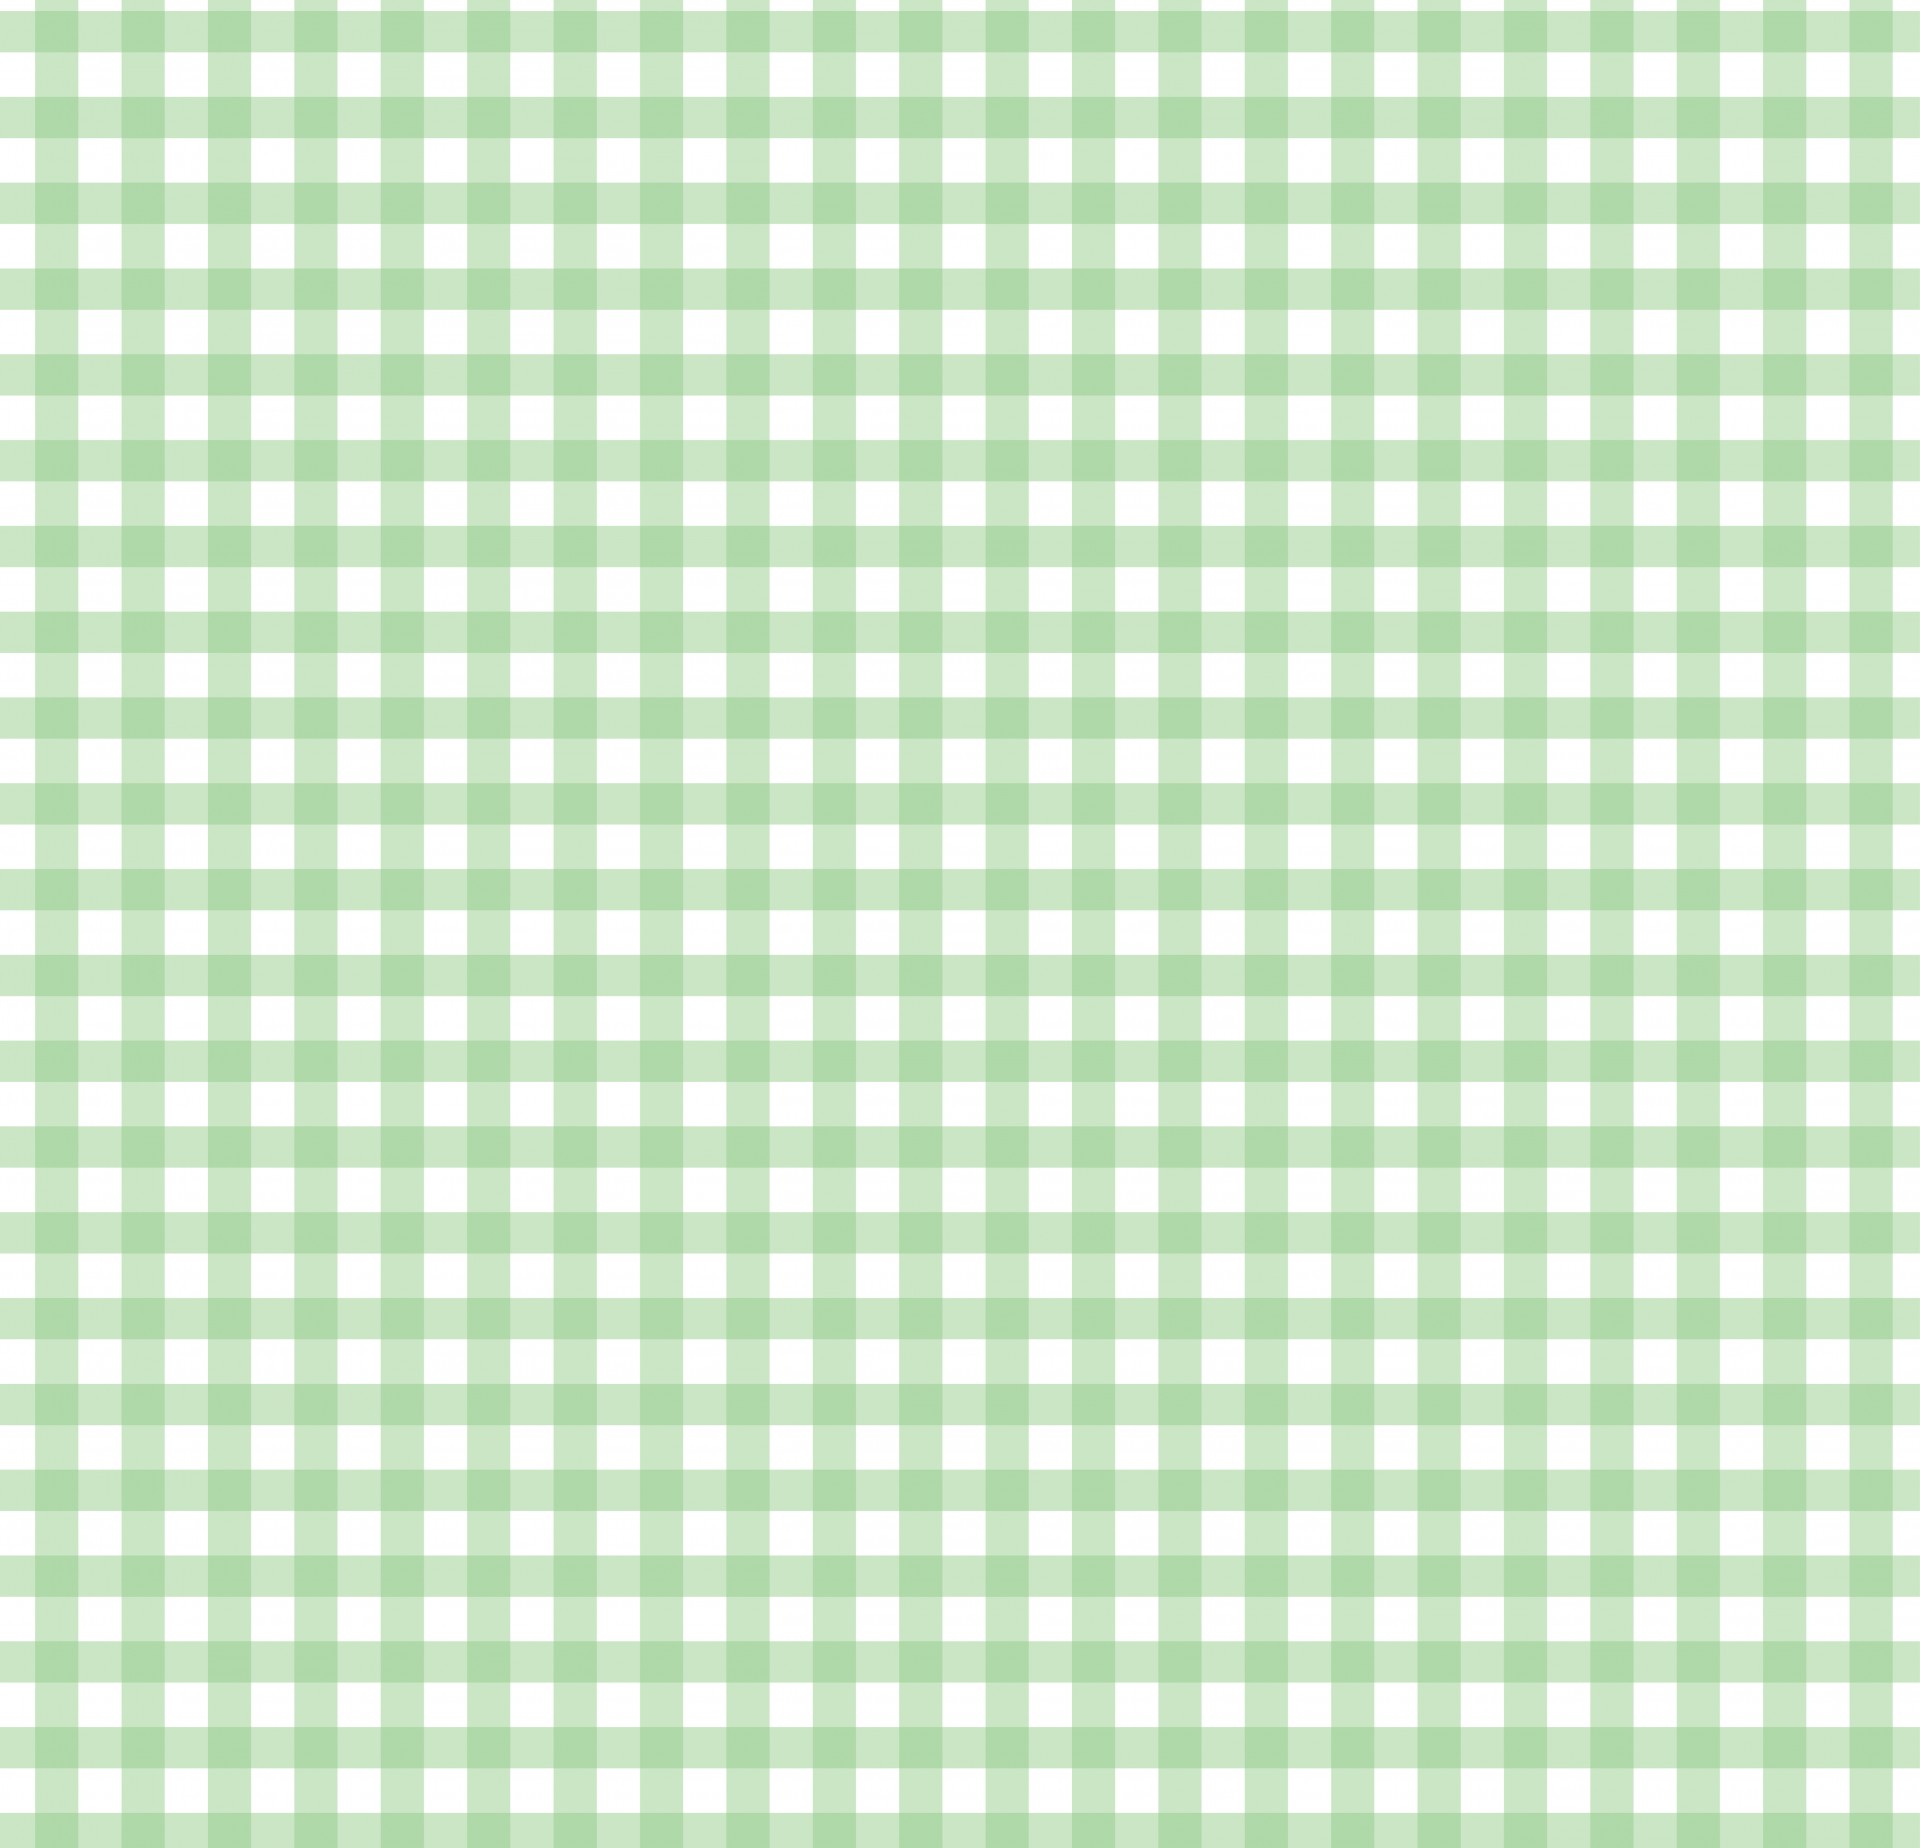 Green gingham checks background for scrapbooking